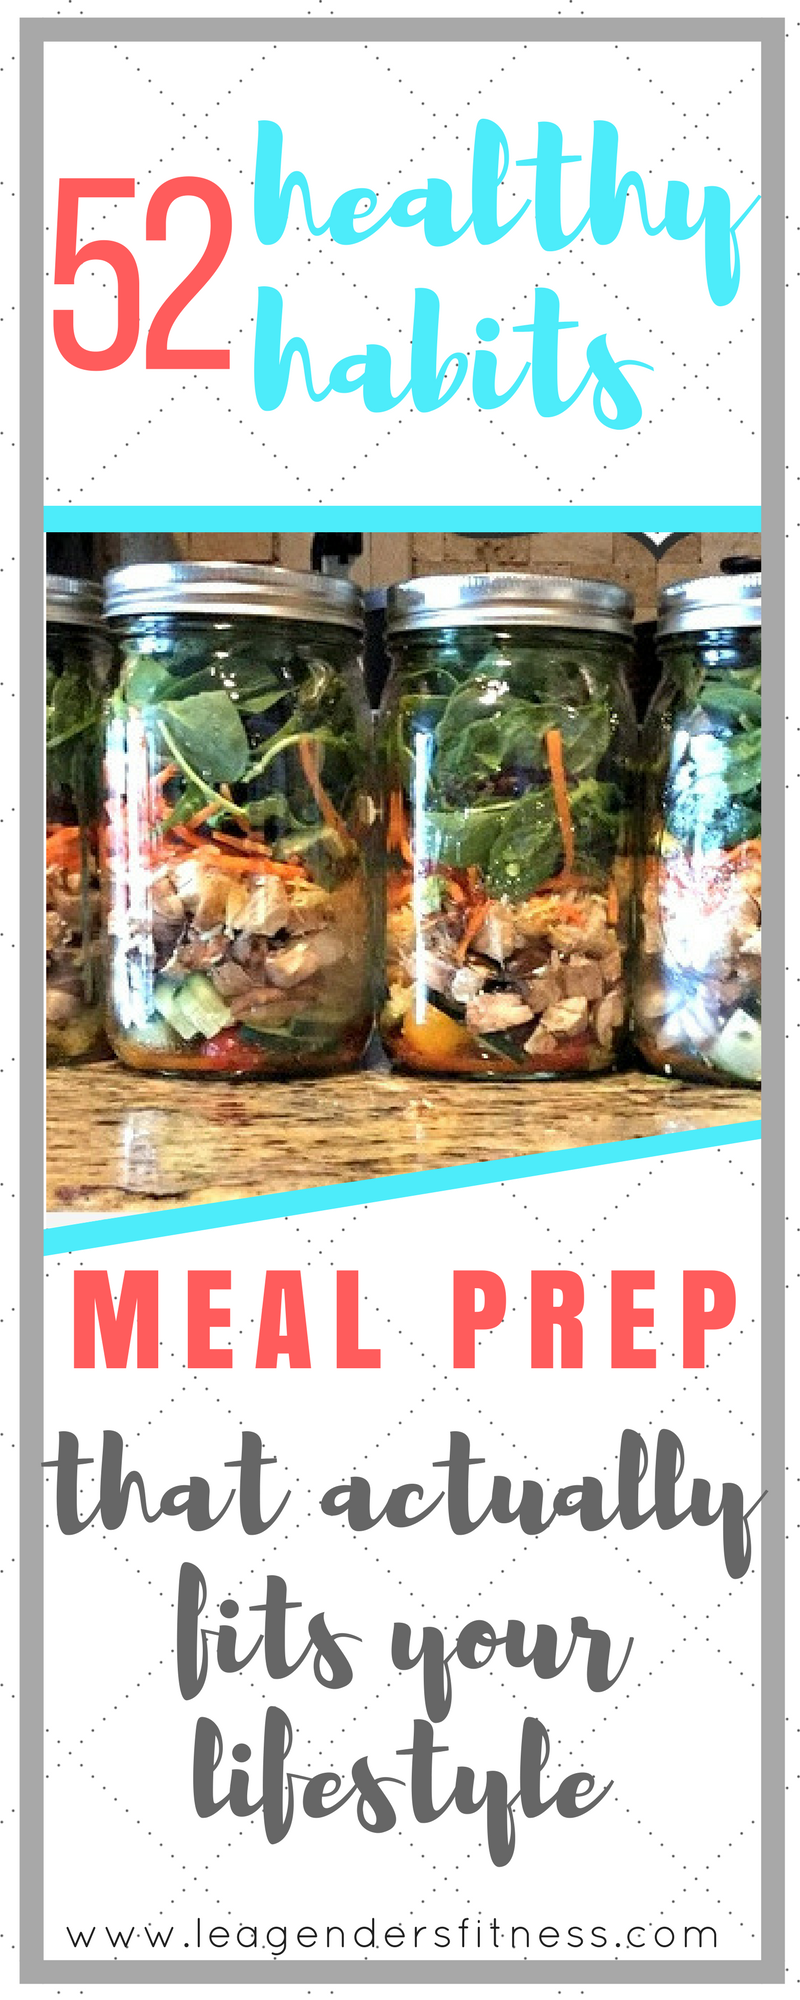 Meal-Prep Plans for Every Kind of Lifestyle